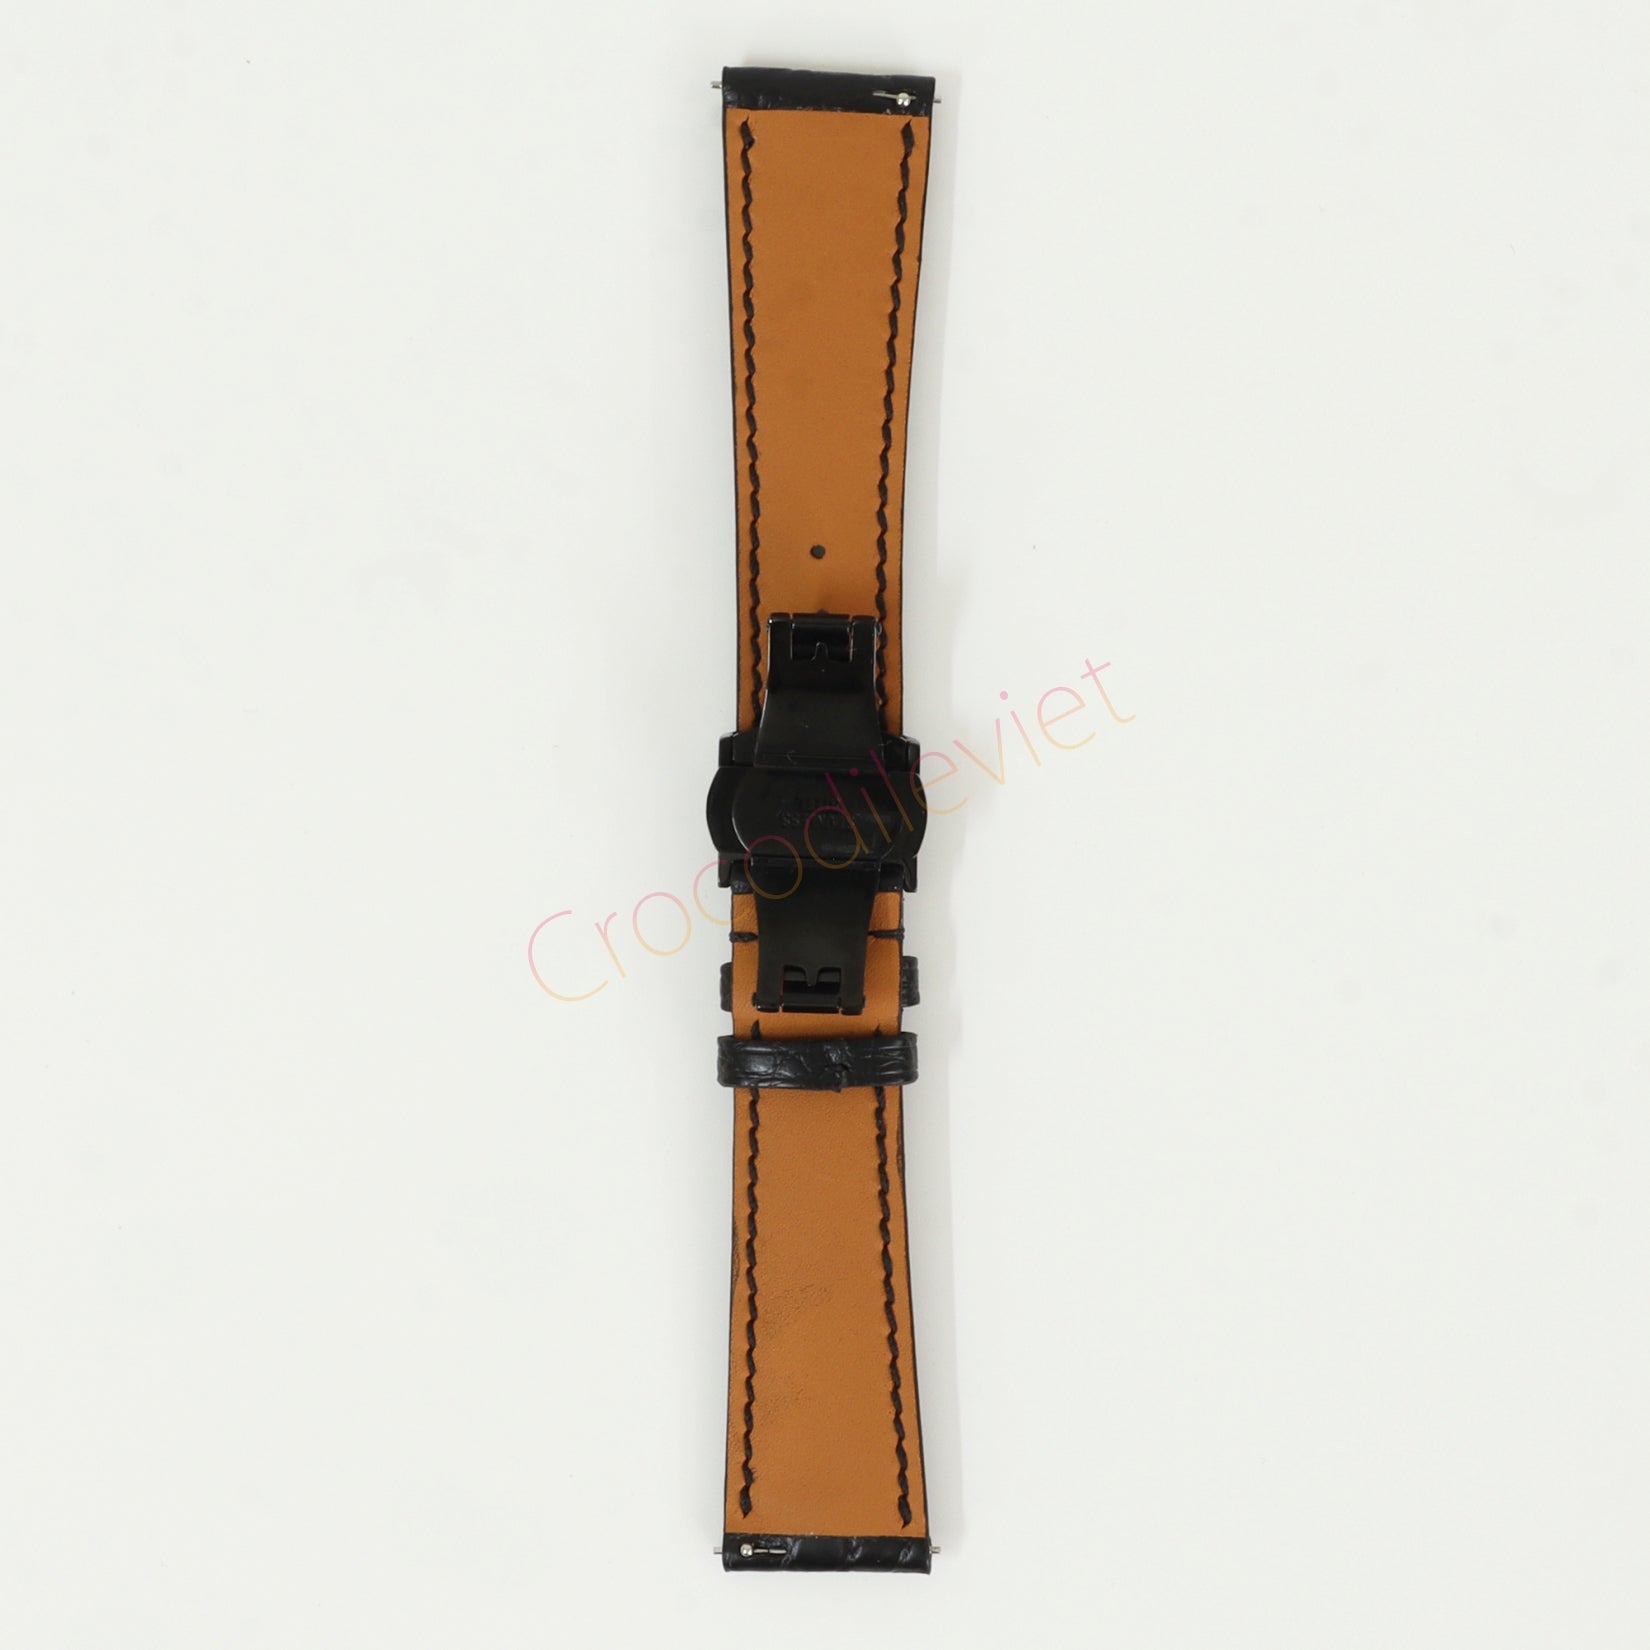 Black Genuine Alligator Leather Watch Straps With Deployant Clasp, Leather Watch Bands Quick Release Pins, Handmade Leather Watch Strap